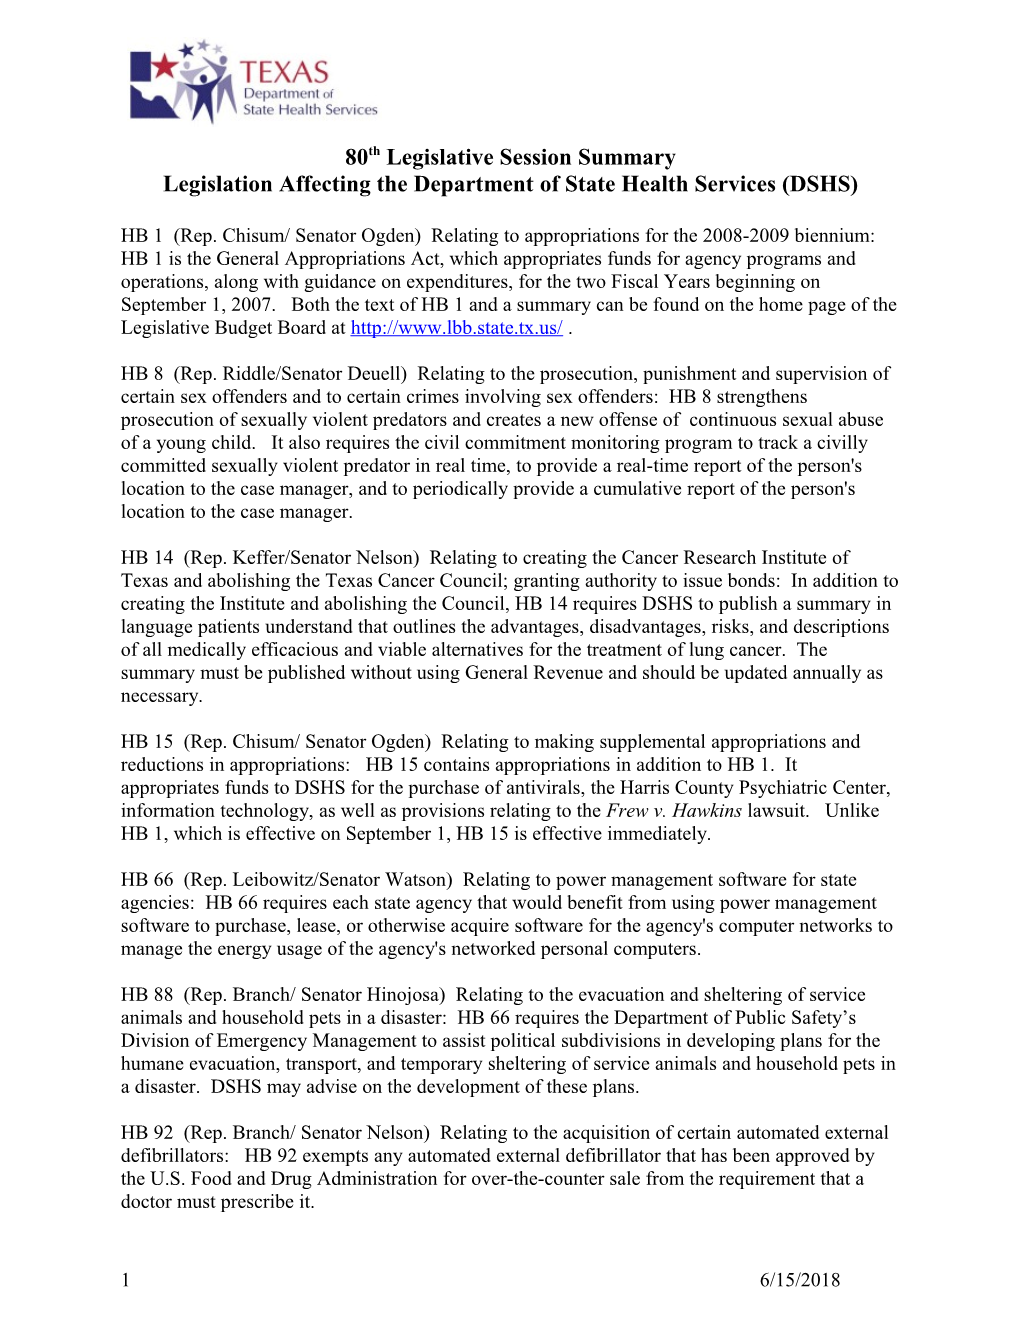 Legislation Affecting the Department of State Health Services (DSHS)